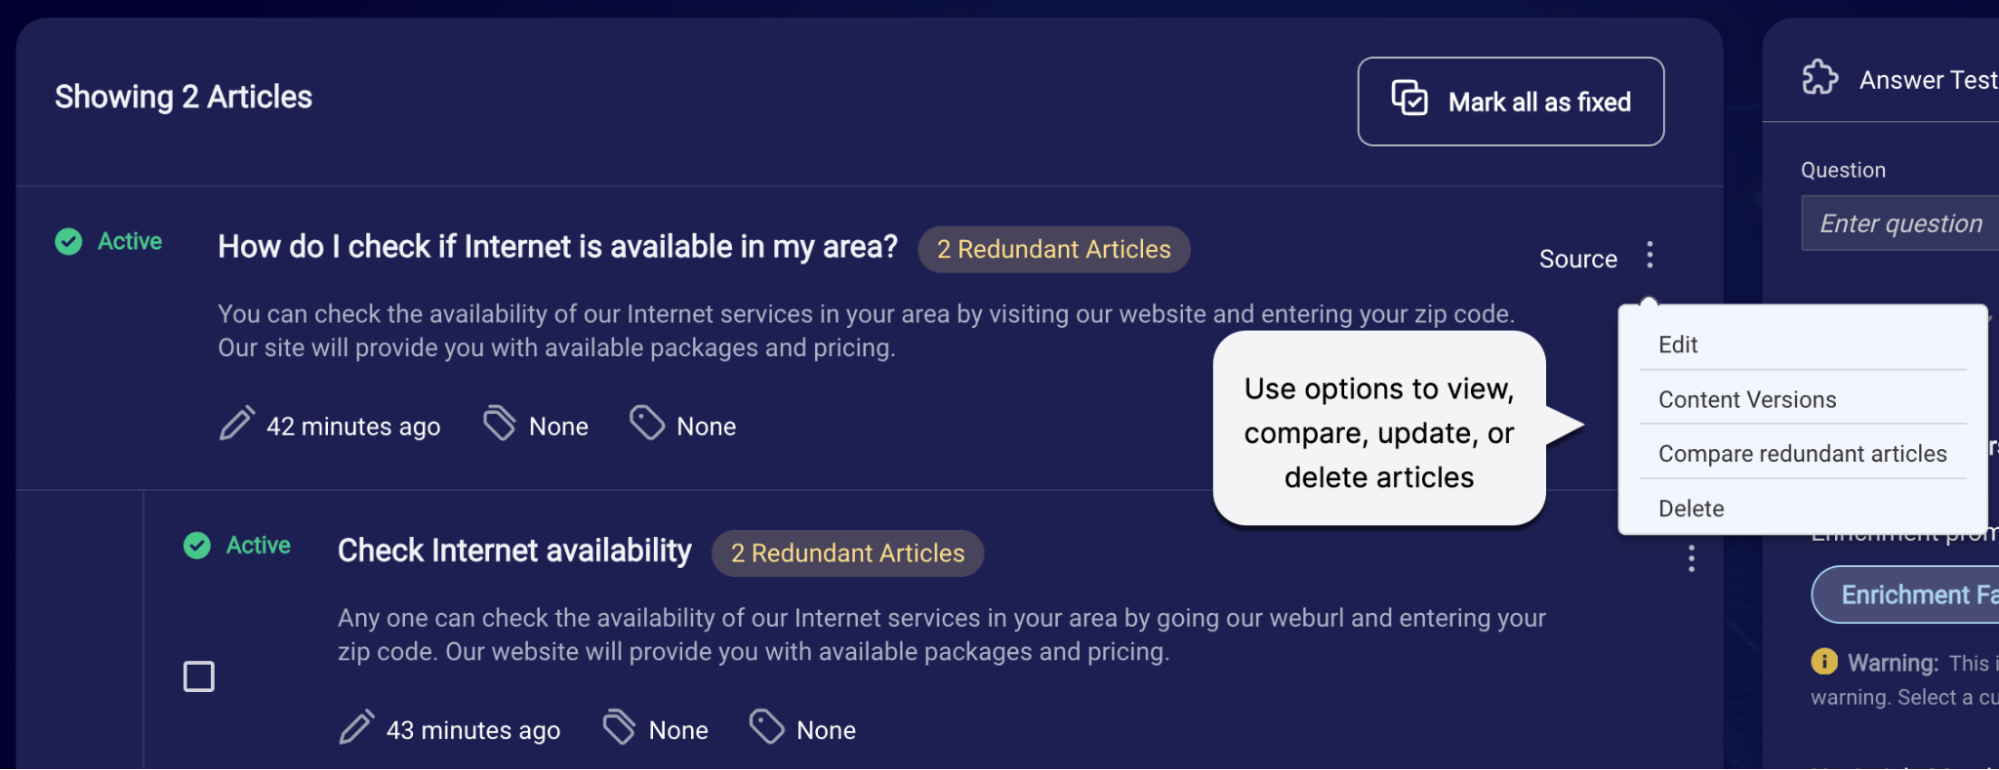 The options to view, compare, update, or delete articles